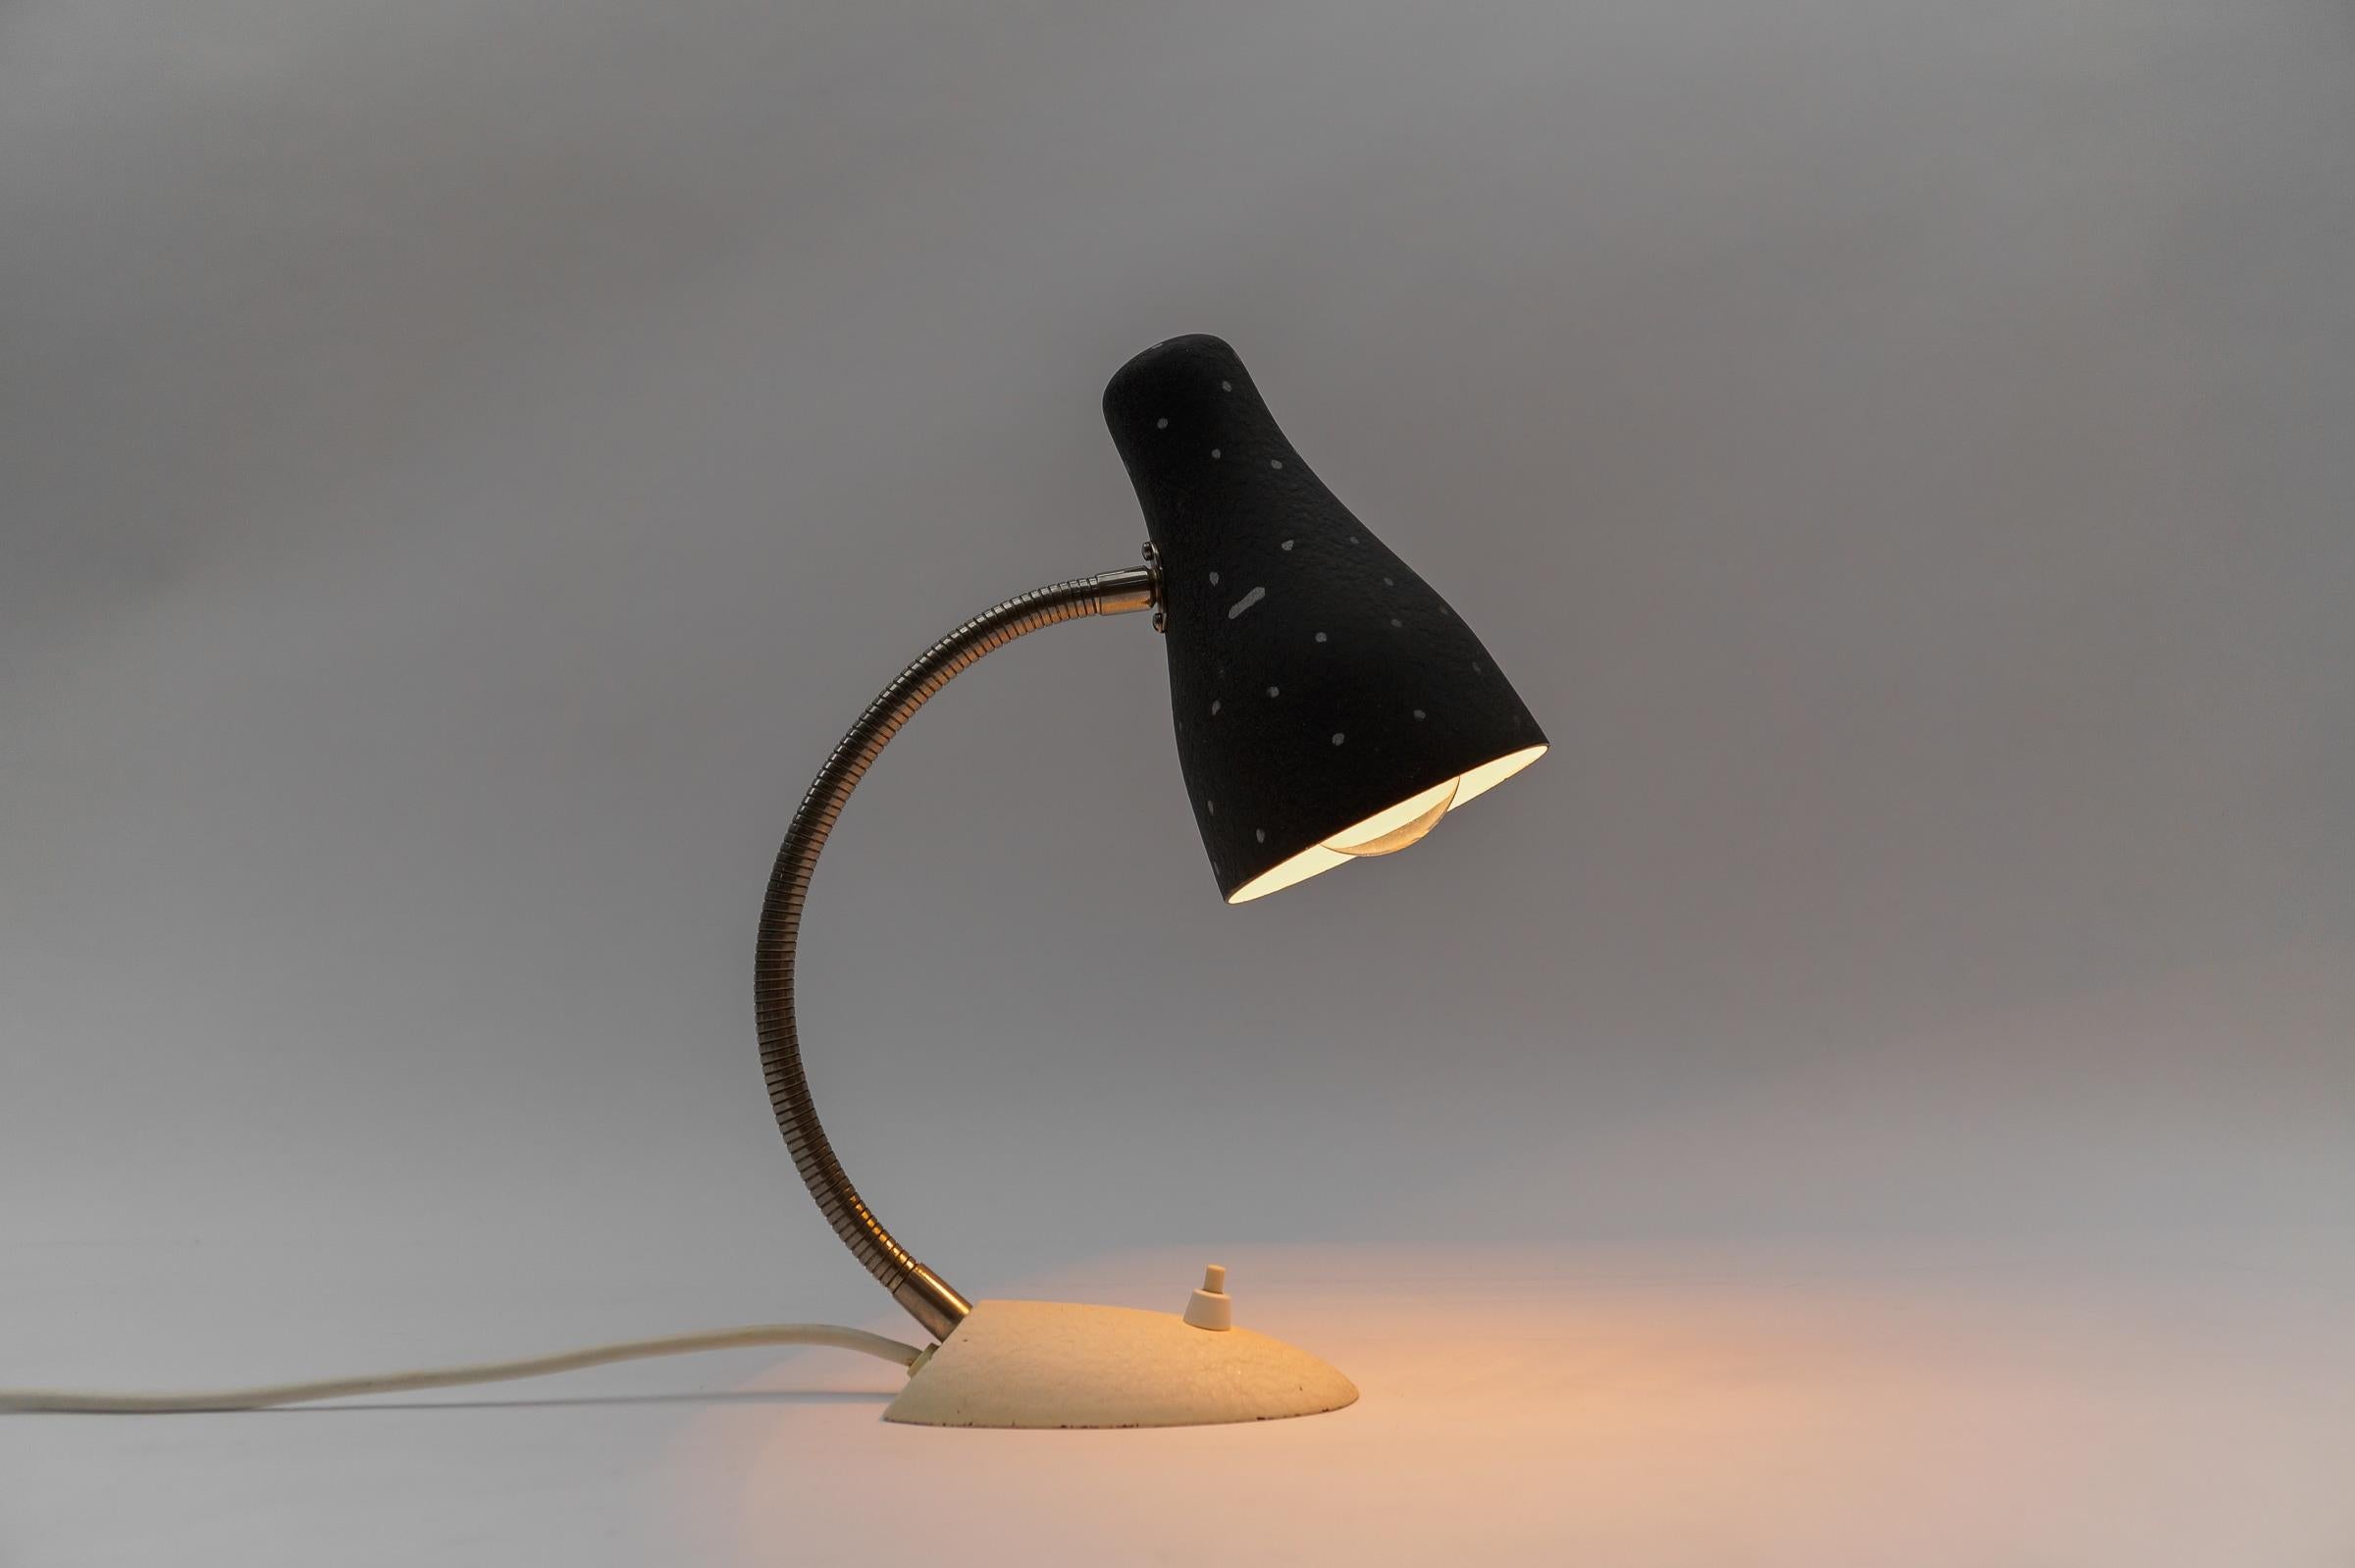 Petite Mid-Century Modern Table Lamp in Brass and Opaline Glass, 1950s

The lamp needs 1 x E14 / E15 Edison screw fit bulb, is wired, and in working condition. It runs both on 110 / 230 volt.

Very elegant and cute at the same time.

Light bulbs are